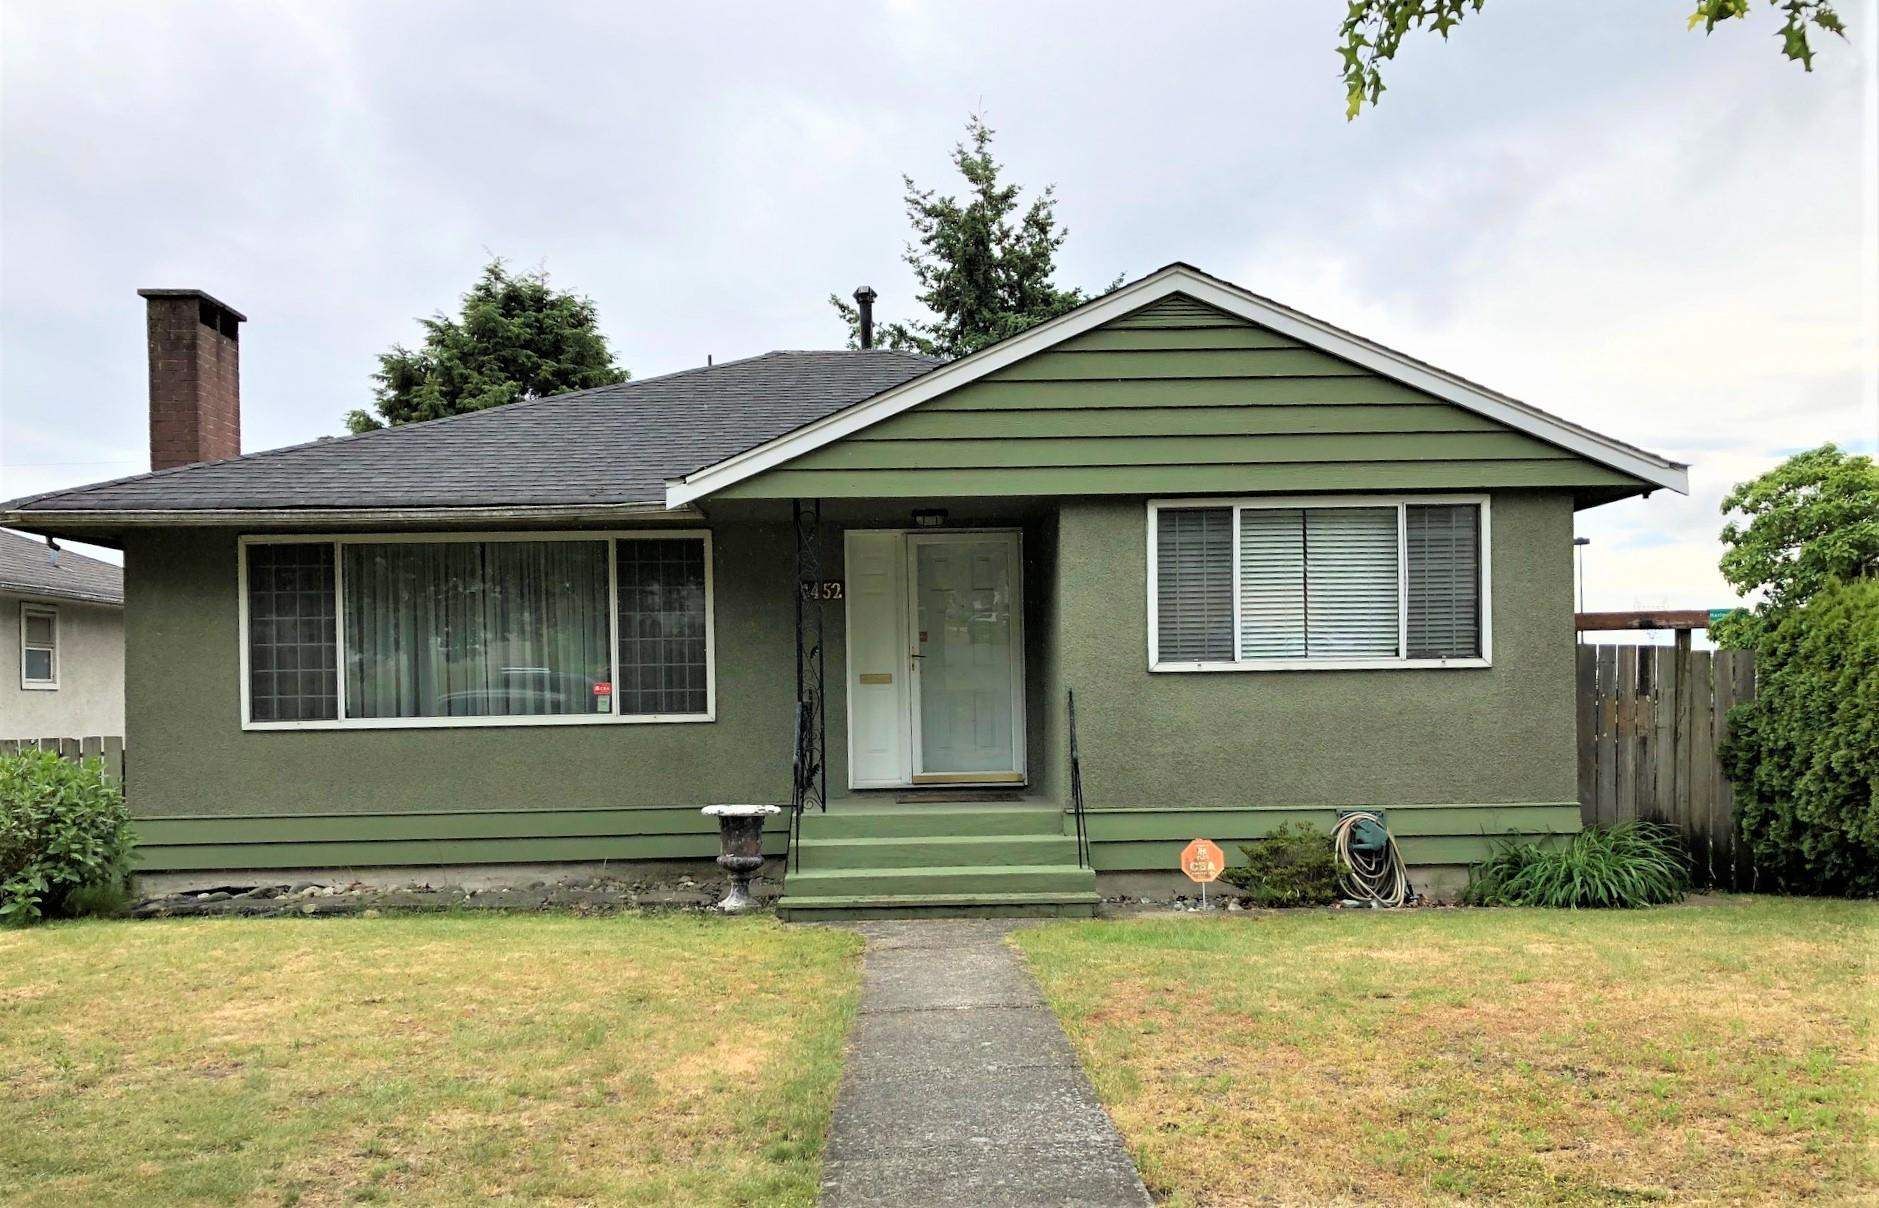 Main Photo: 1452 E 64TH Avenue in Vancouver: Fraserview VE House for sale (Vancouver East)  : MLS®# R2597856